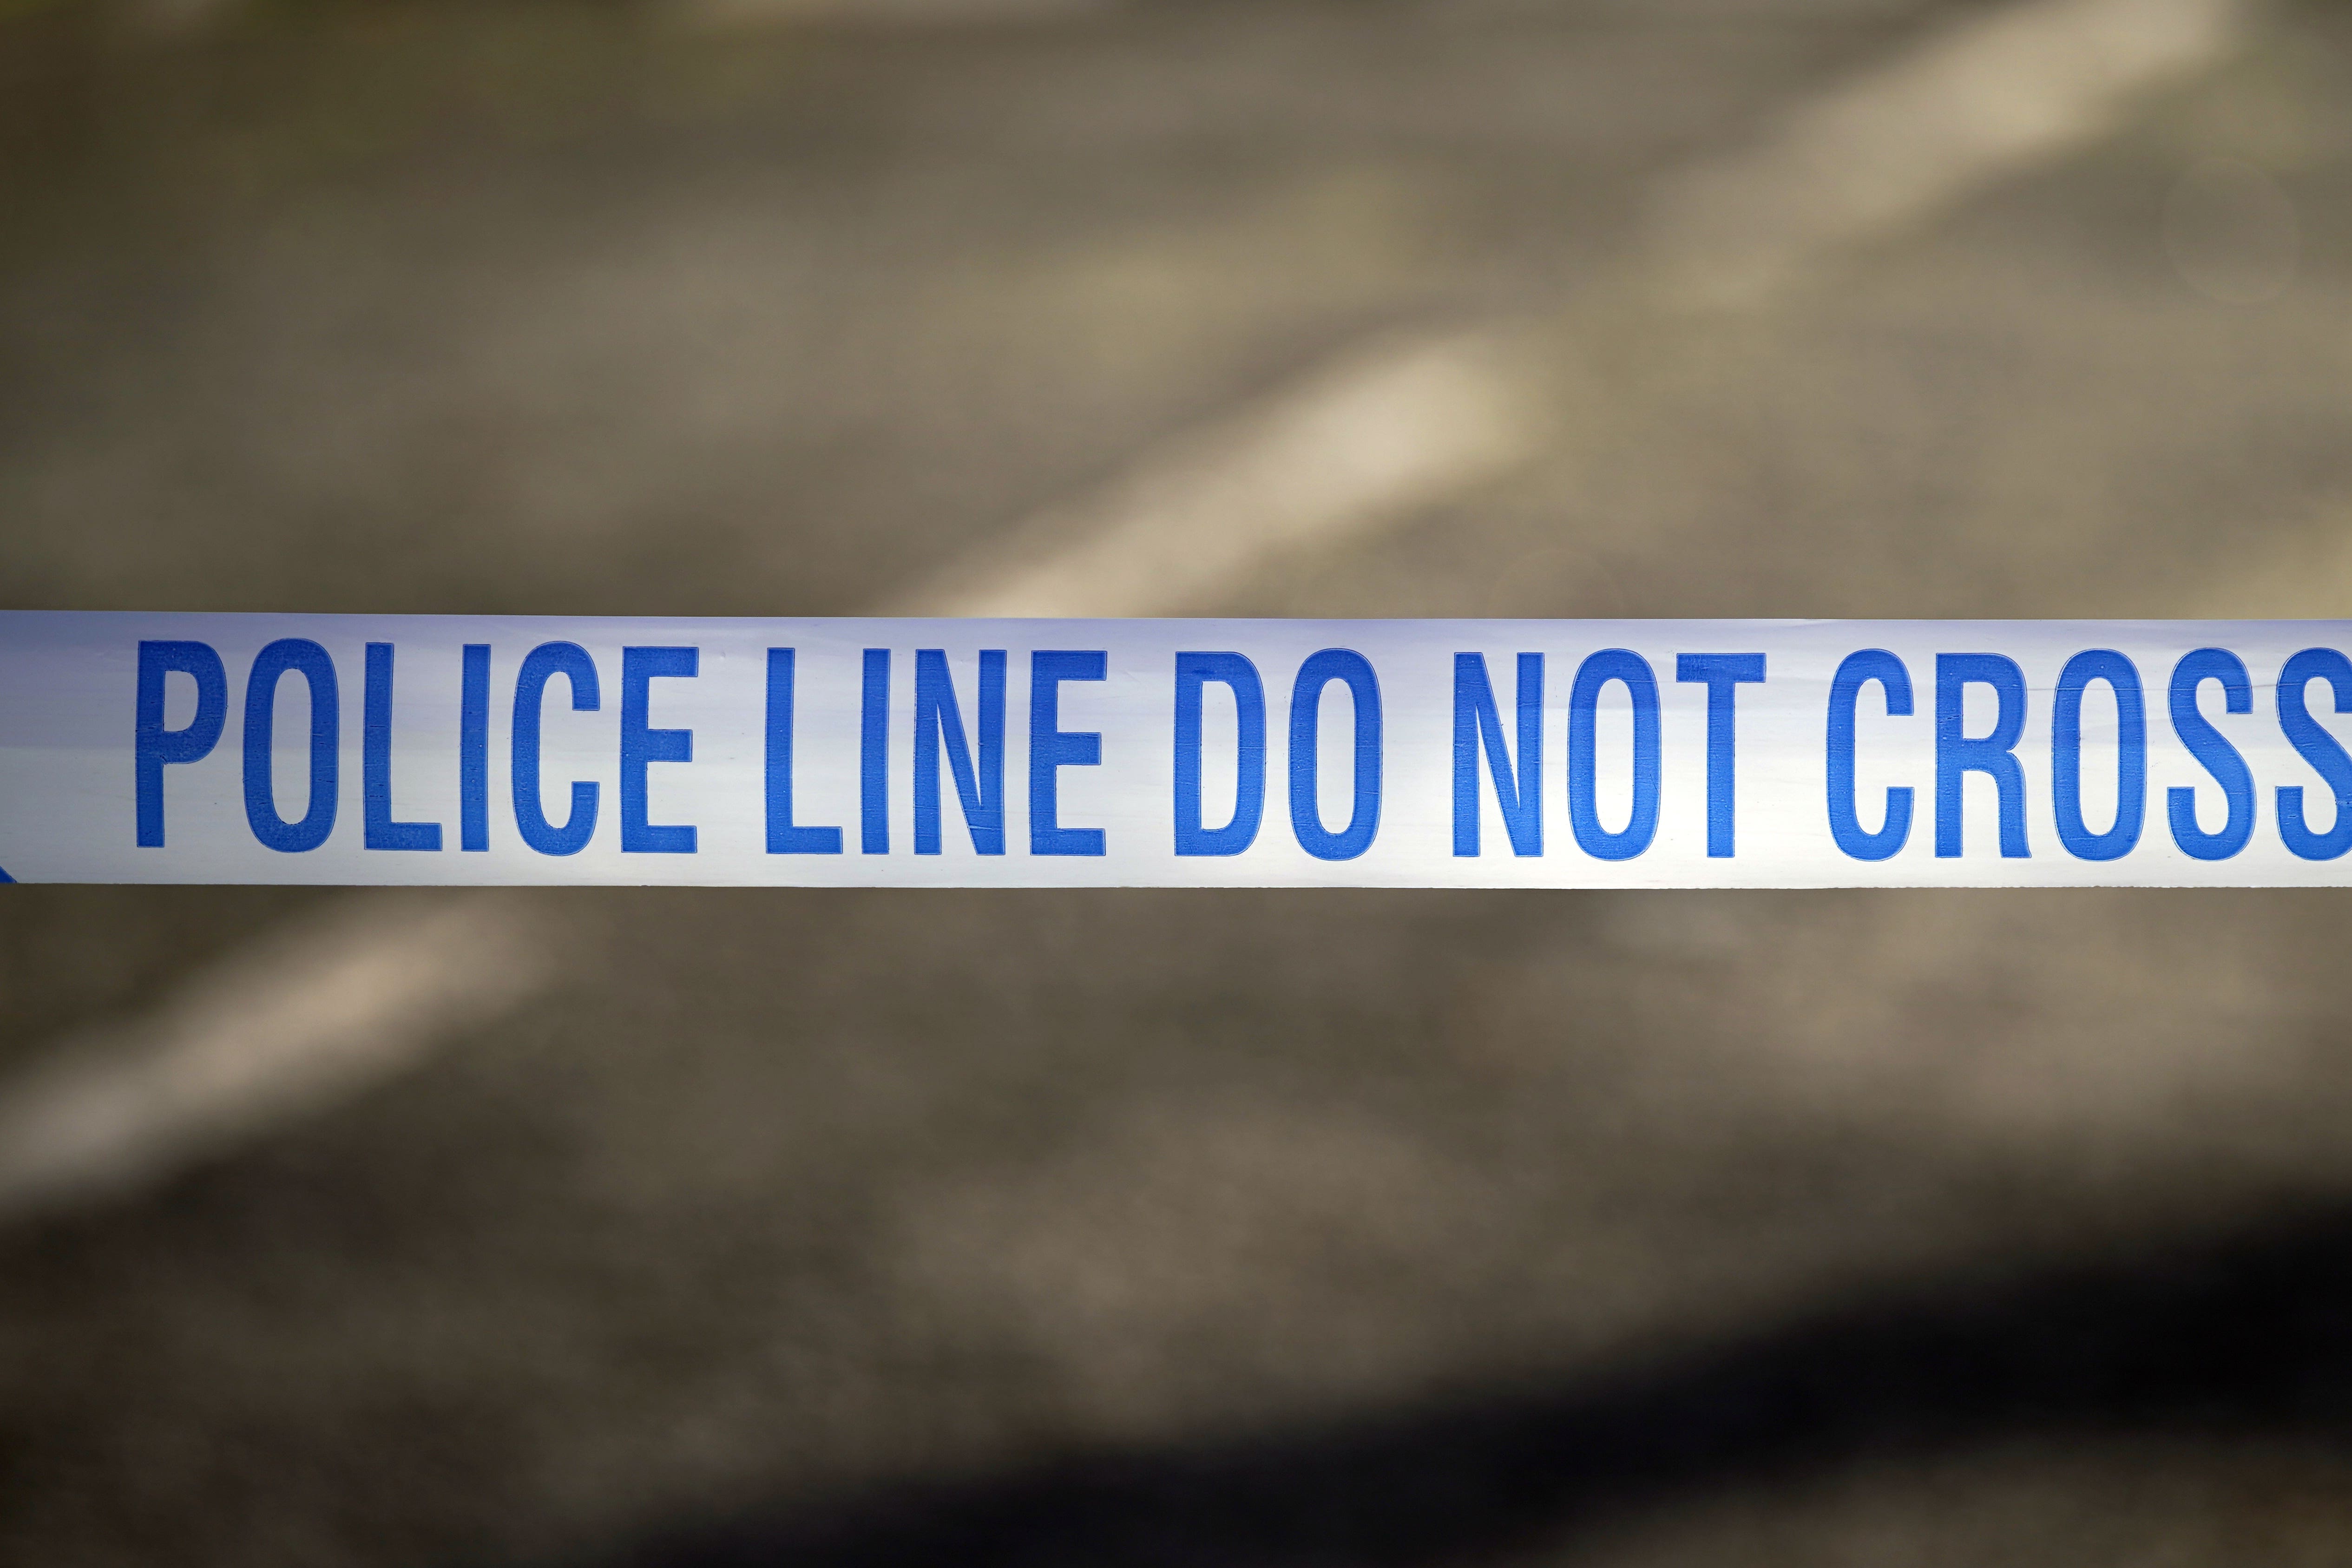 One man has been arrested after police were called to Haresfield Close